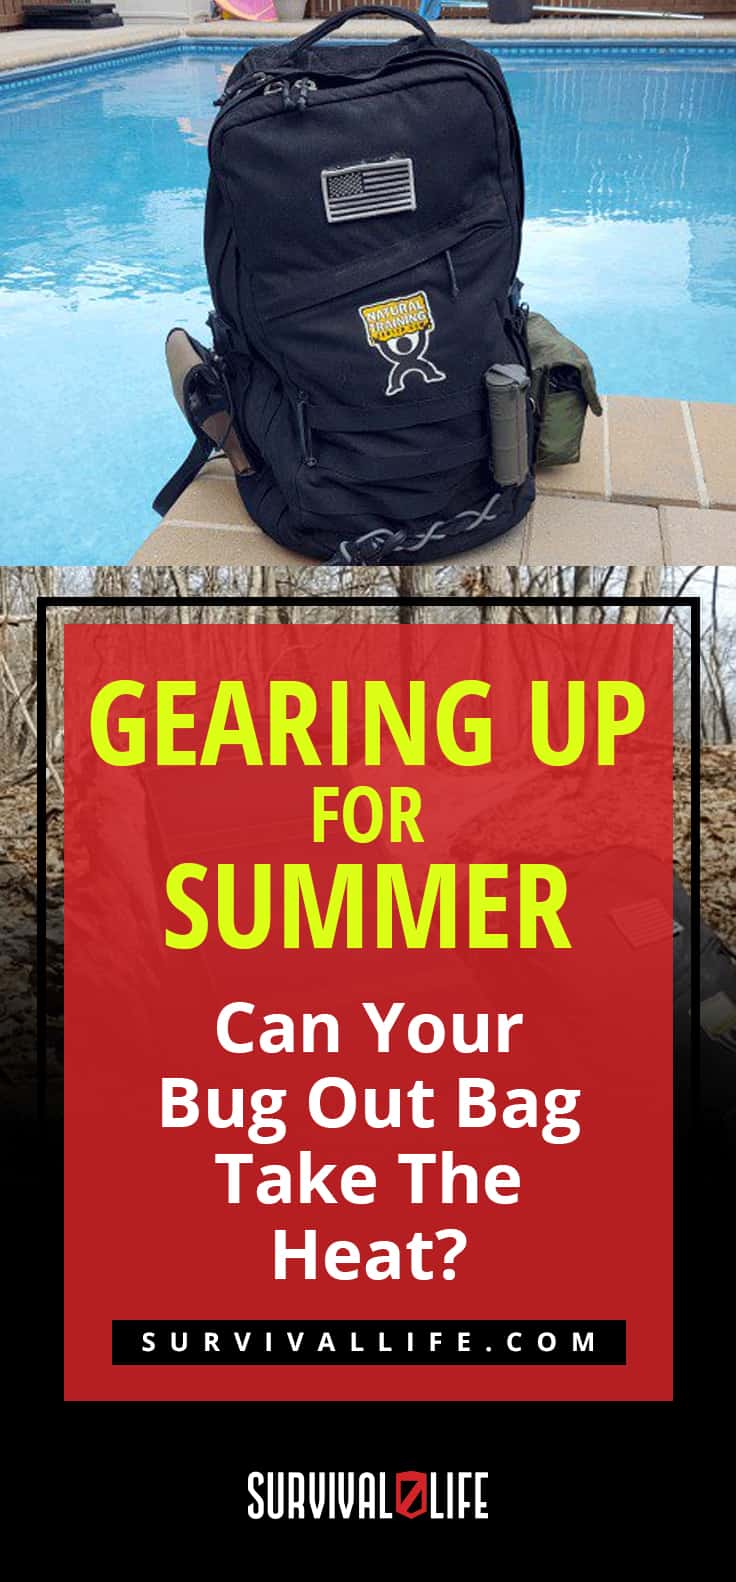 Check out Gearing Up For Summer: Can Your Bug Out Bag Take The Heat? at https://survivallife.com/bug-out-bag-for-summer/